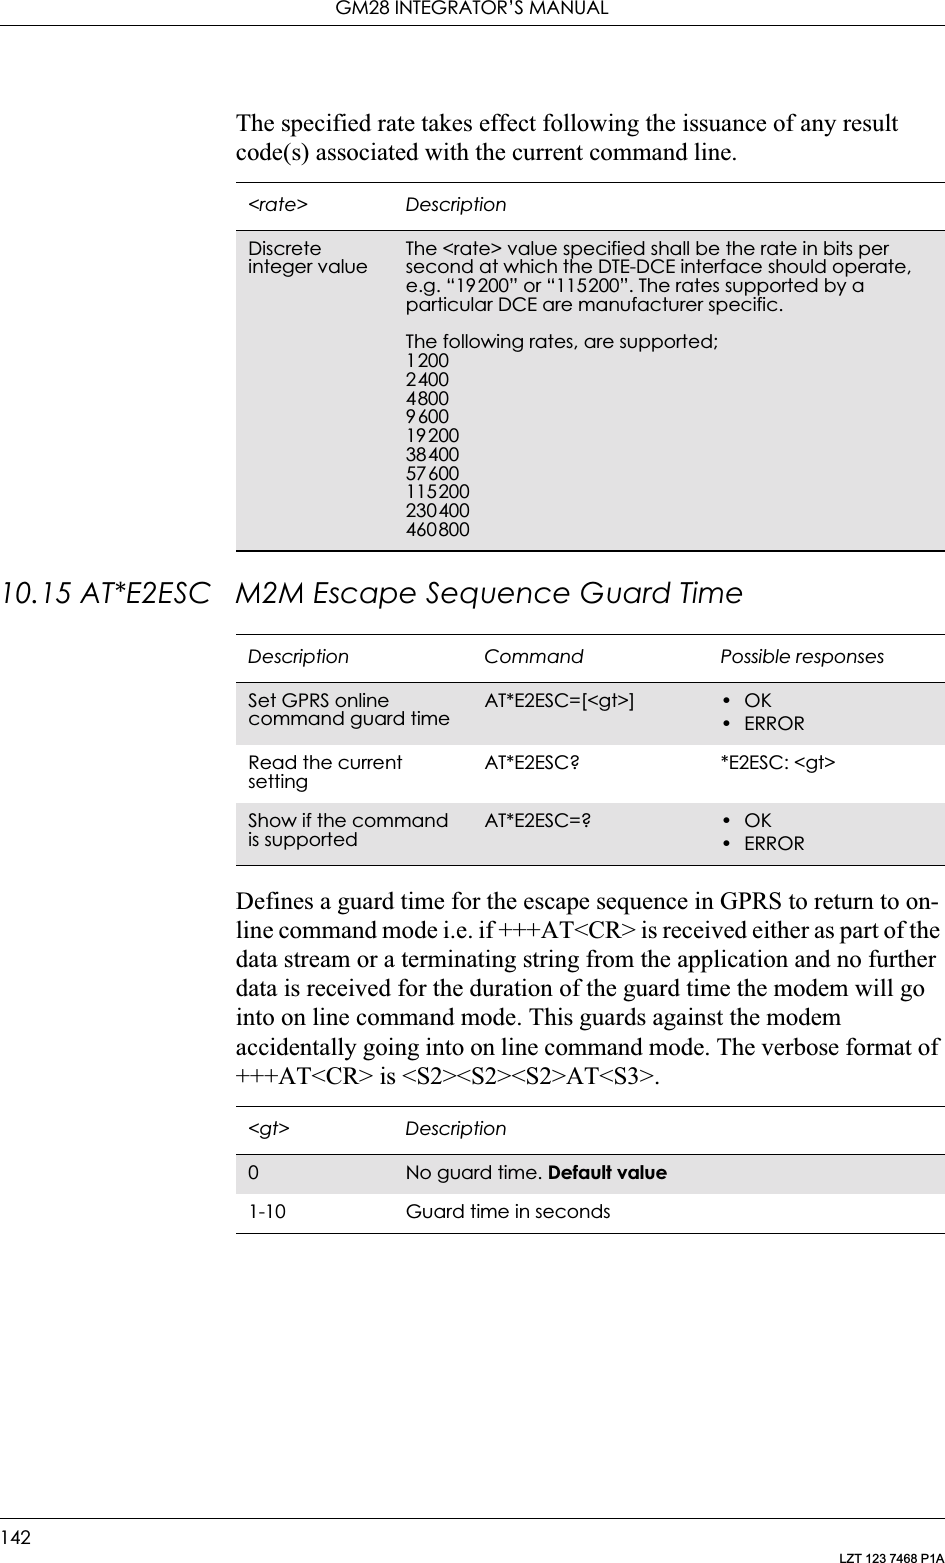 GM28 INTEGRATOR’S MANUAL142LZT 123 7468 P1AThe specified rate takes effect following the issuance of any result code(s) associated with the current command line.10.15 AT*E2ESC M2M Escape Sequence Guard TimeDefines a guard time for the escape sequence in GPRS to return to on-line command mode i.e. if +++AT&lt;CR&gt; is received either as part of the data stream or a terminating string from the application and no further data is received for the duration of the guard time the modem will go into on line command mode. This guards against the modem accidentally going into on line command mode. The verbose format of +++AT&lt;CR&gt; is &lt;S2&gt;&lt;S2&gt;&lt;S2&gt;AT&lt;S3&gt;.&lt;rate&gt; DescriptionDiscrete integer valueThe &lt;rate&gt; value specified shall be the rate in bits per second at which the DTE-DCE interface should operate, e.g. “19200” or “115200”. The rates supported by a particular DCE are manufacturer specific.The following rates, are supported;1200240048009600192003840057600115200230400460800Description Command Possible responsesSet GPRS online command guard timeAT*E2ESC=[&lt;gt&gt;] •OK•ERRORRead the current settingAT*E2ESC? *E2ESC: &lt;gt&gt;Show if the command is supportedAT*E2ESC=? •OK•ERROR&lt;gt&gt; Description0No guard time. Default value1-10 Guard time in seconds